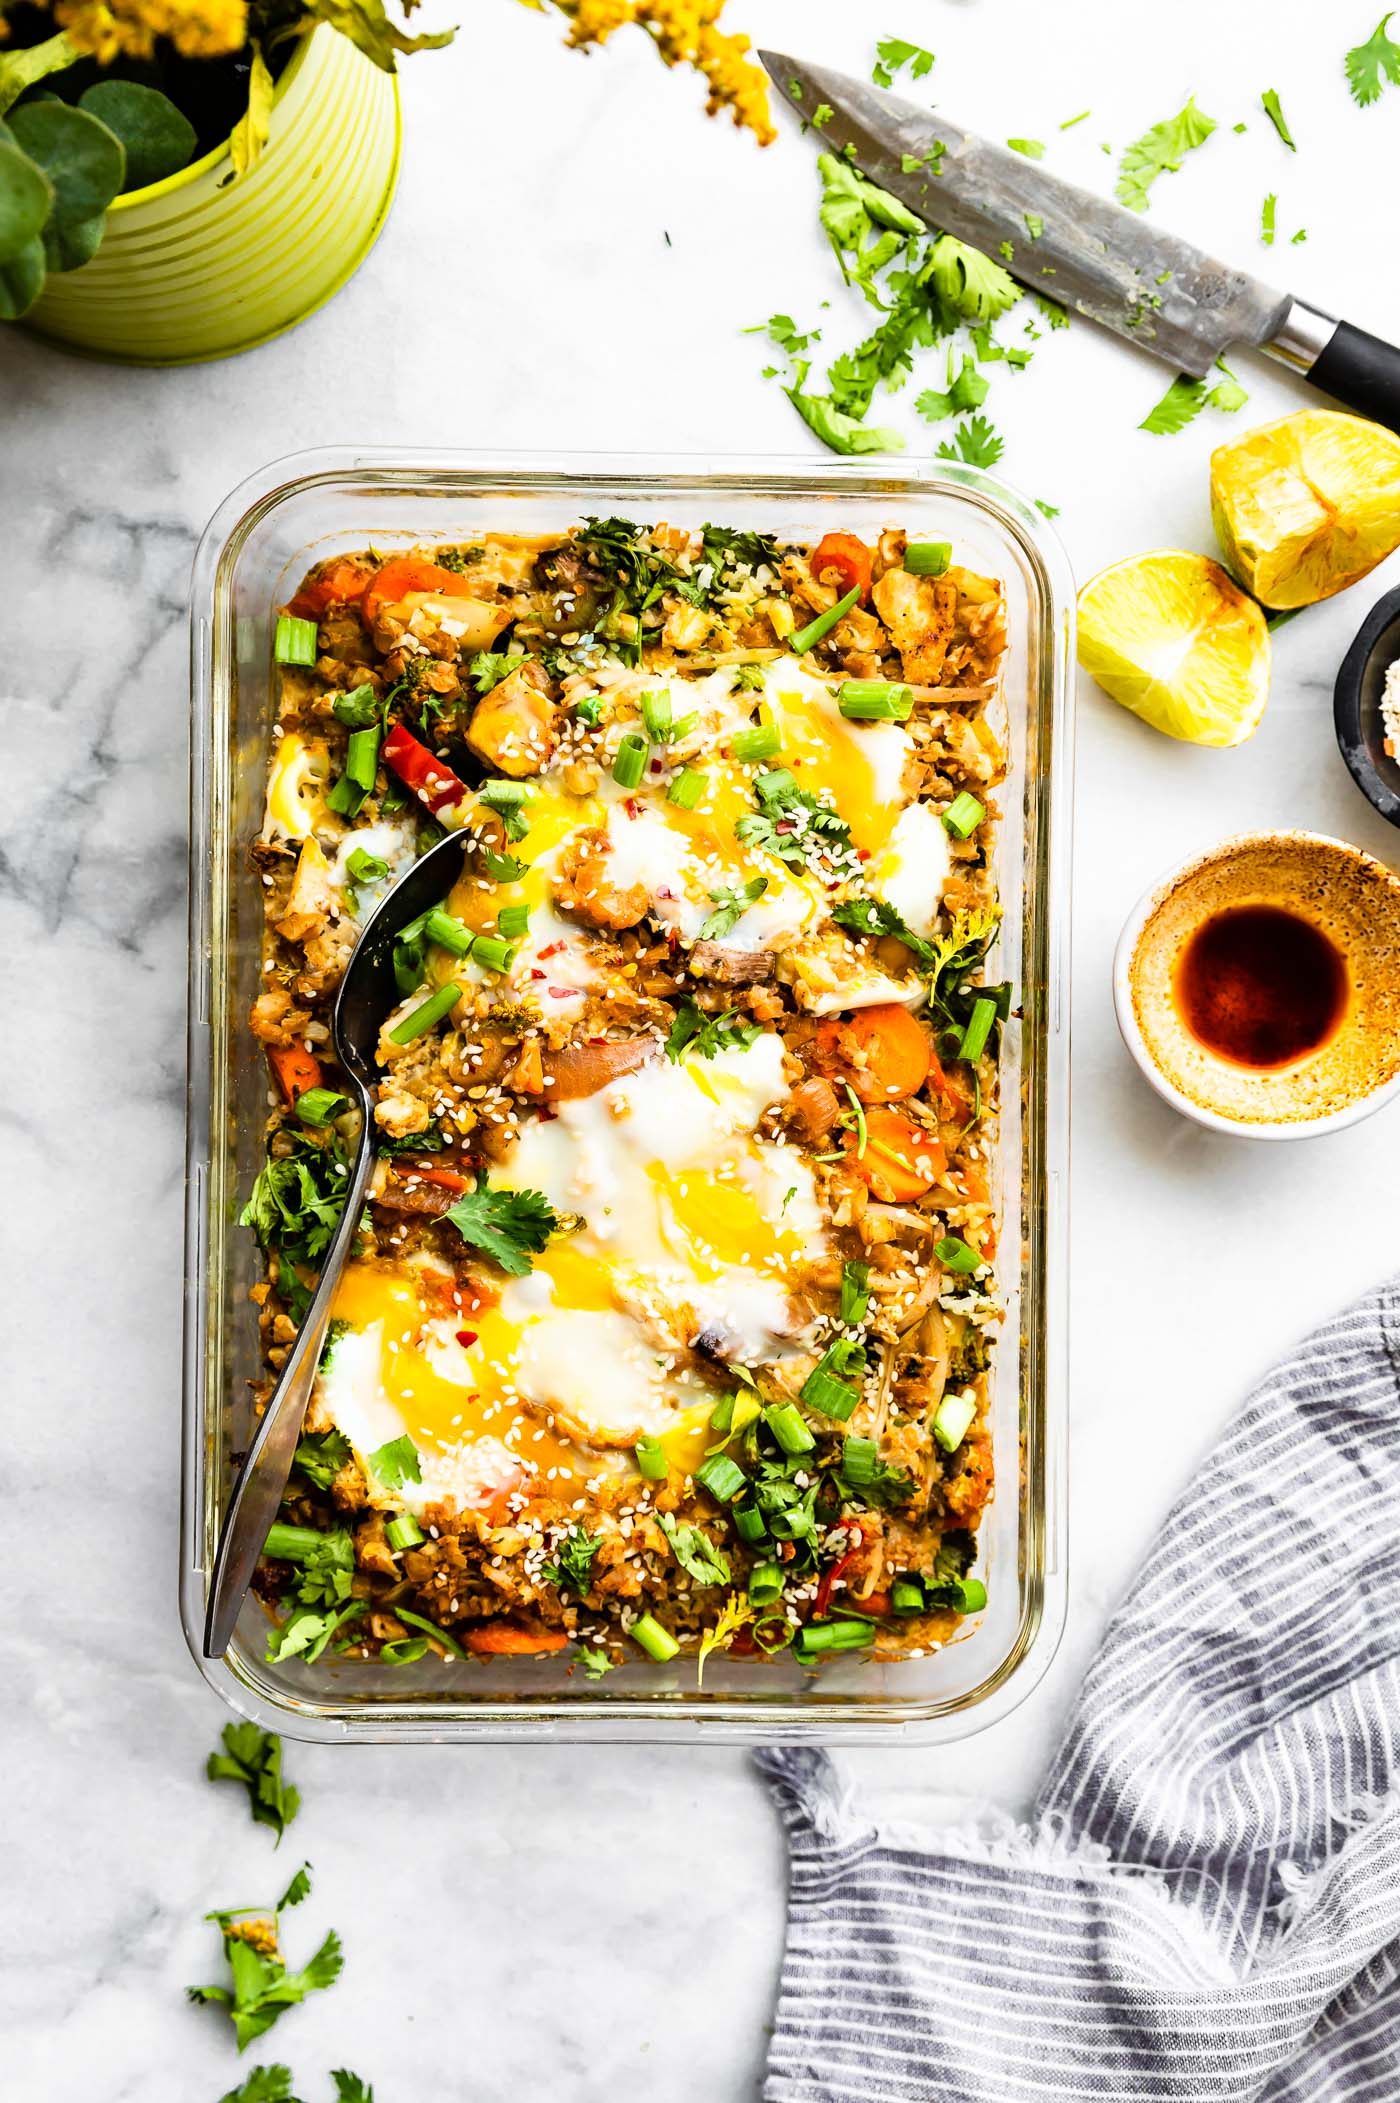 Overhead view baking dish filled with Chinese cauliflower fried rice casserole with fried eggs on top.